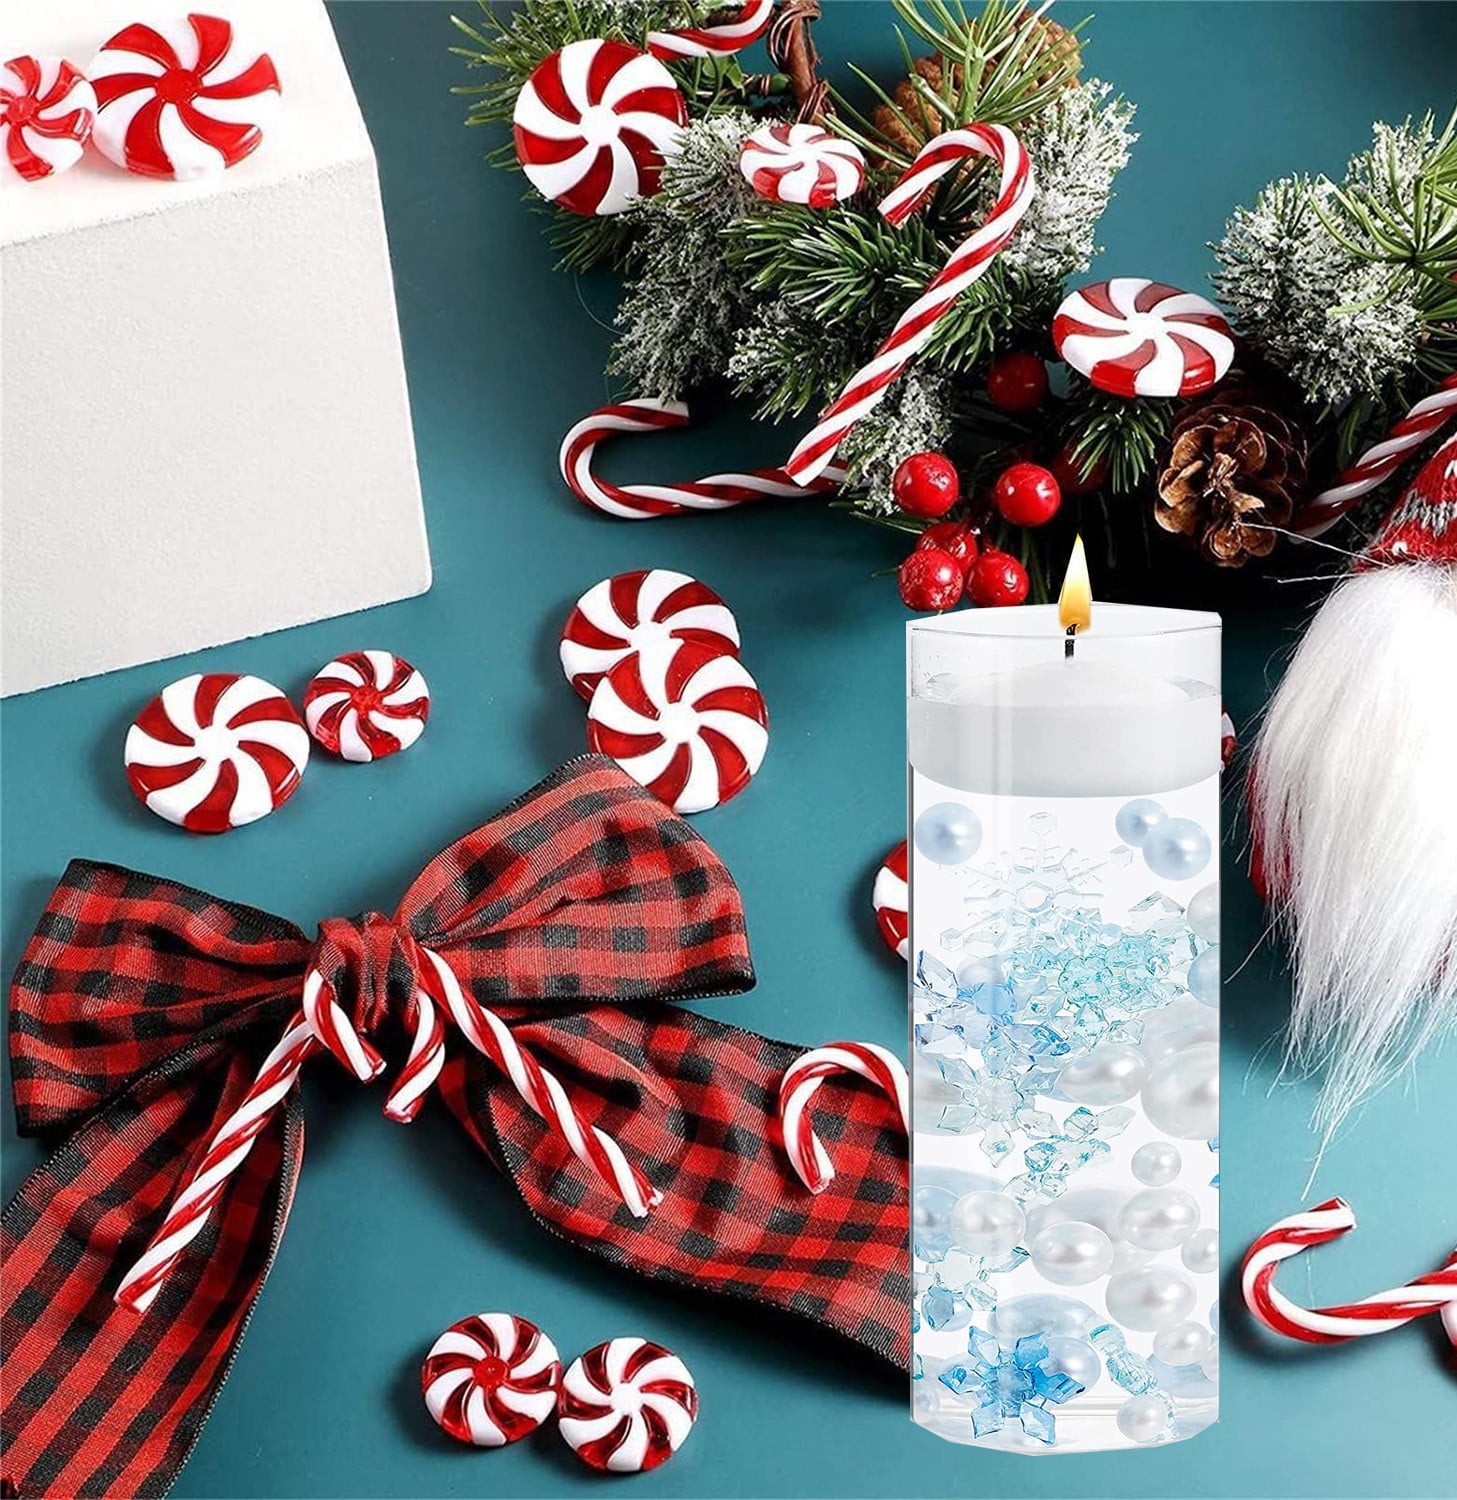 2124 Pieces Christmas Vase Filler Pearls Including 8 Floating Snowflake